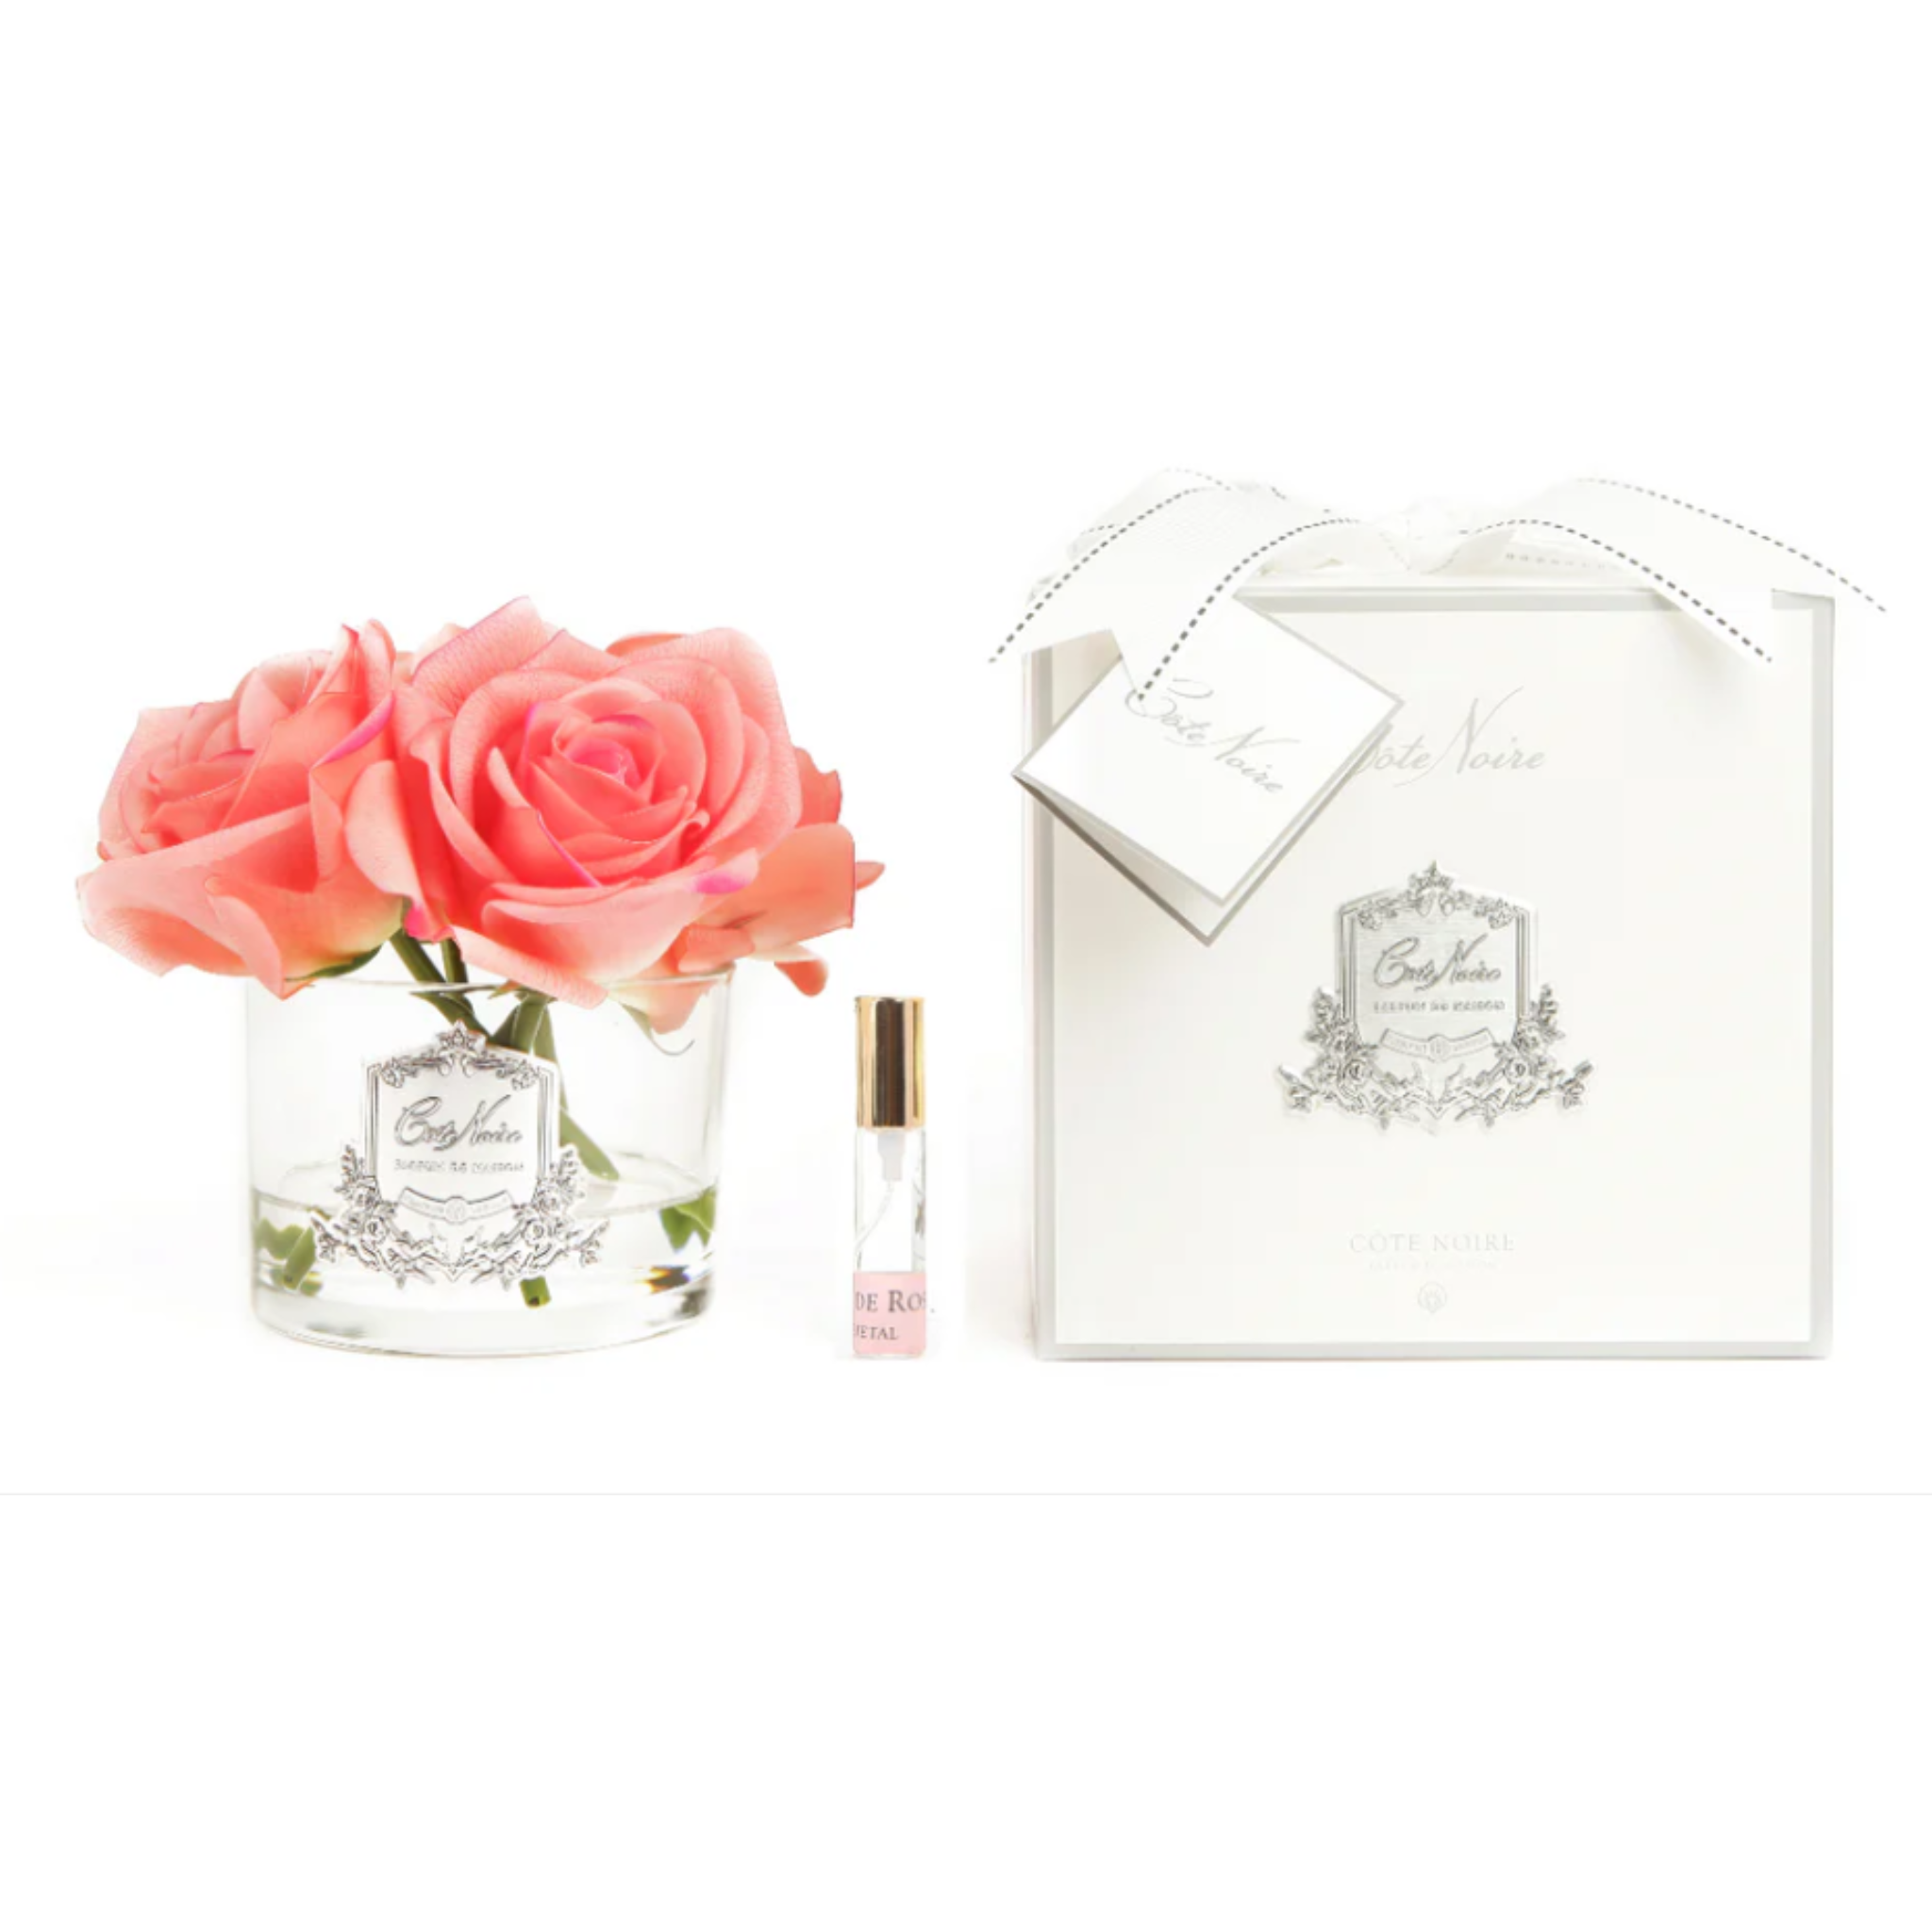 Cote Noire Perfumed Natural Touch 5 Roses - Clear - White Peach